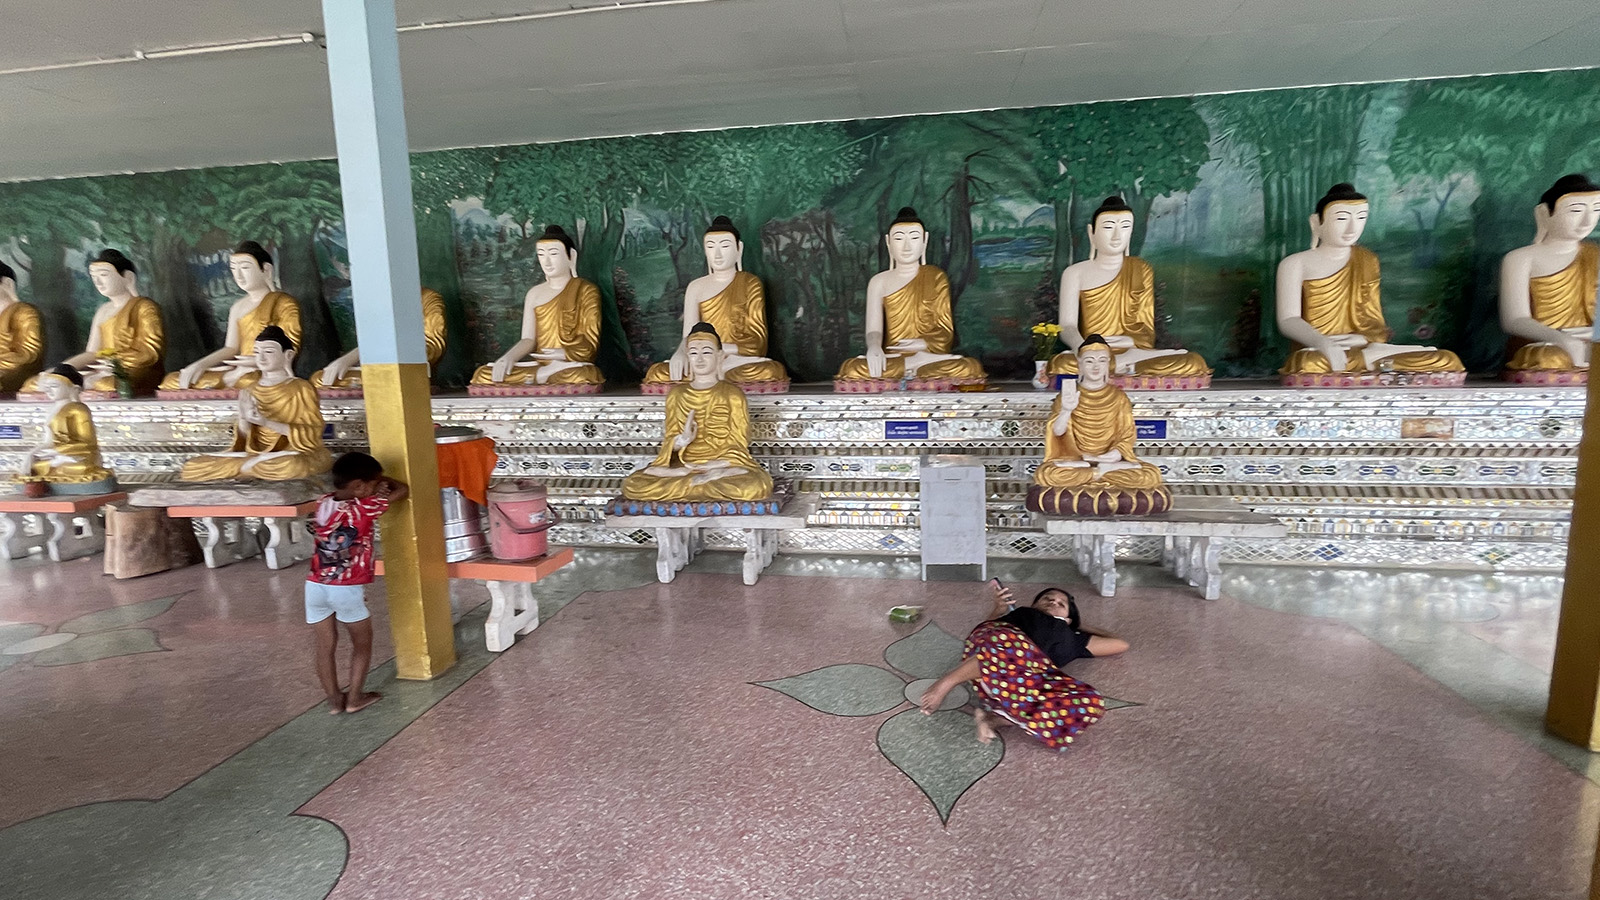 Children play at a Buddhist temple in Mae Sot, Thailand, in March 2023. Photo by Kalpana Jain